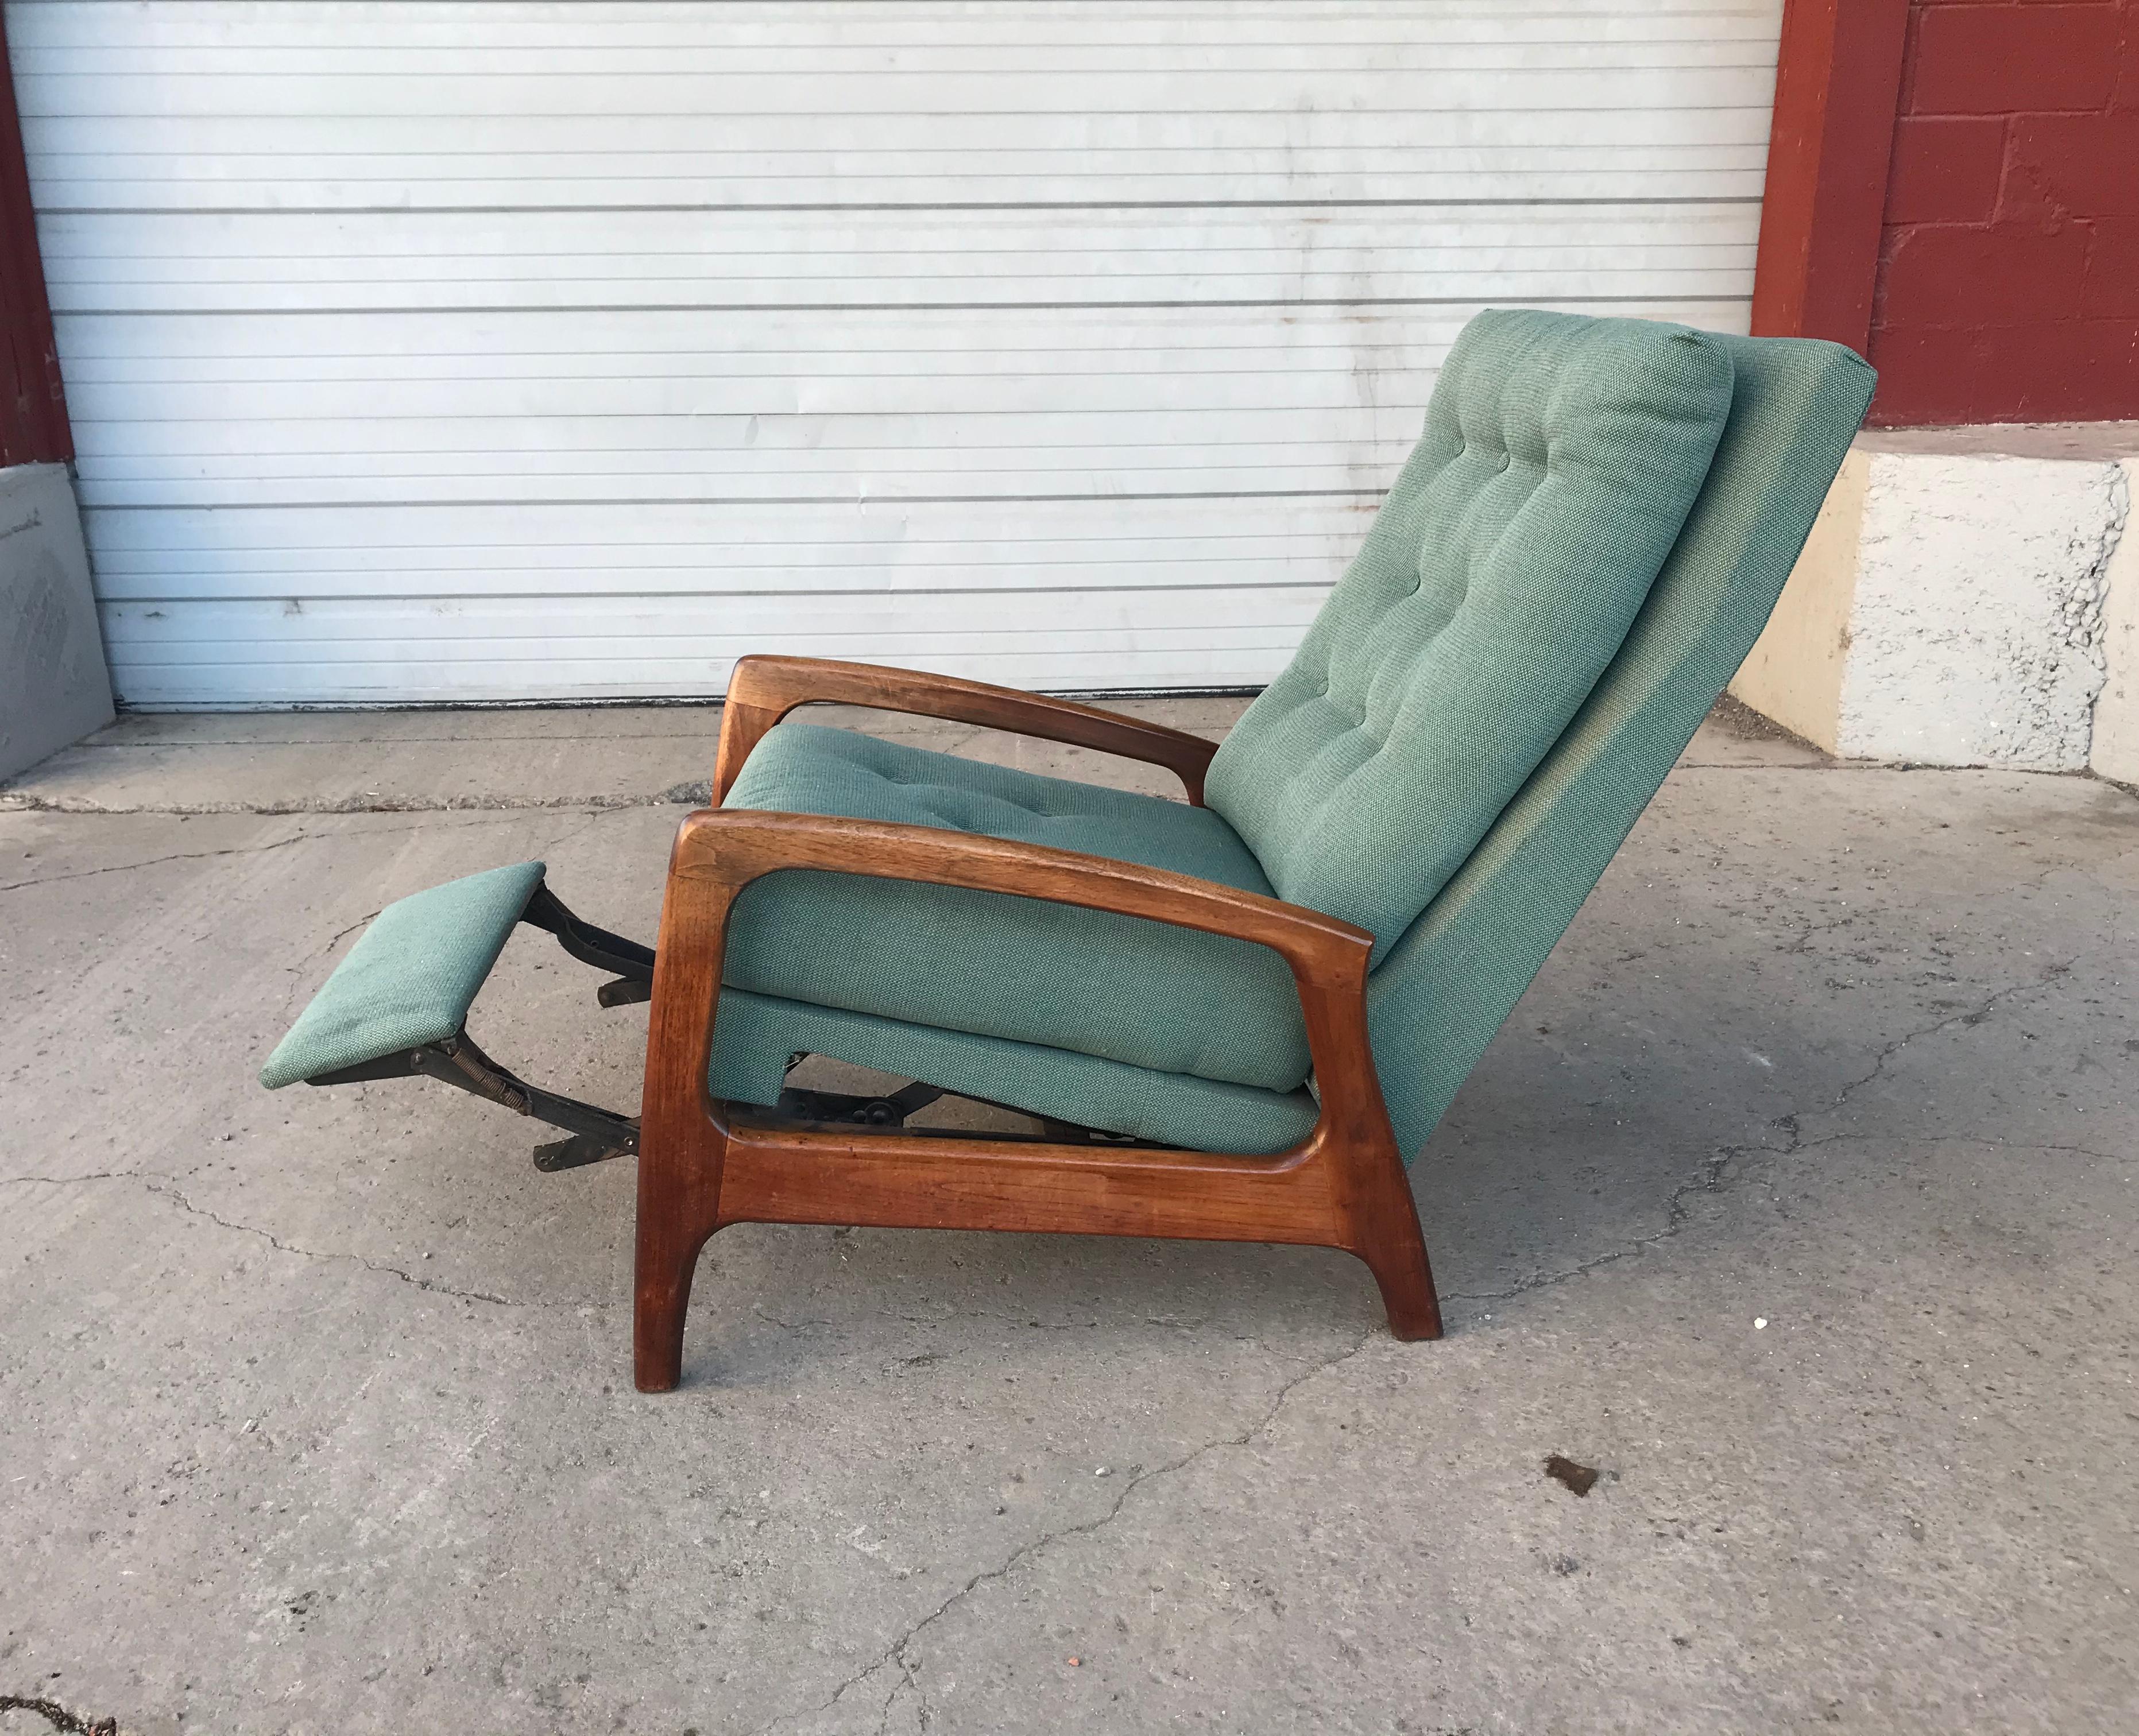 Rare Adrian Pearsall midcentury highback recliner / lounge chair,, Appears to retain its original fabric,, Wonderful sculpted walnut frame, 3 position lounge,, Classic Mid-Century Modern design,, Extremely comfortable,, Hand delivery avail to New